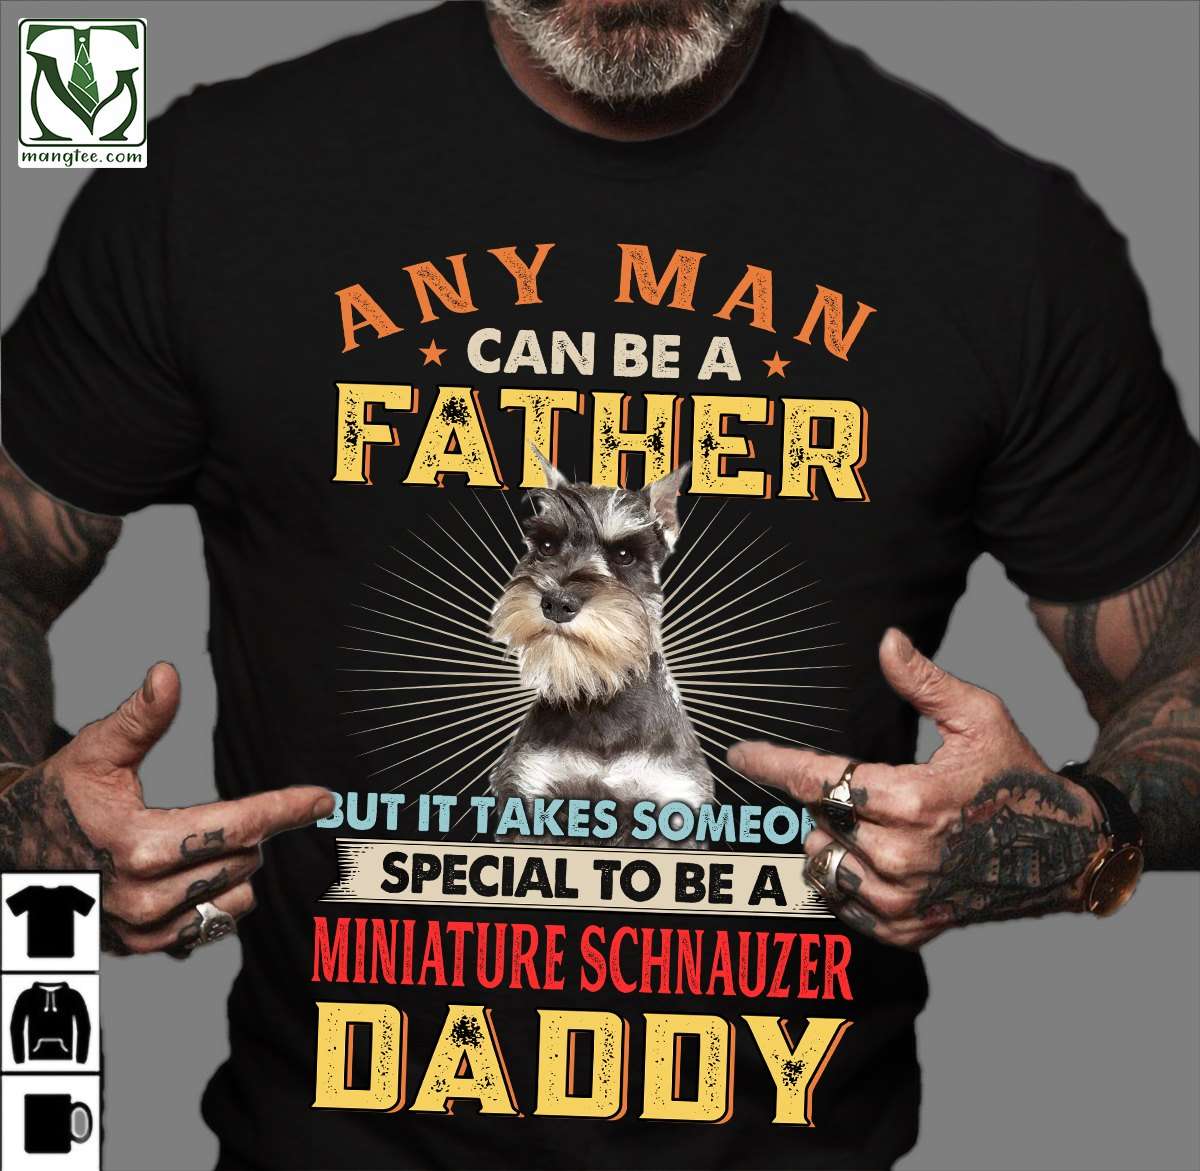 Miniature Schnauzer Dog - Any man can be a father but it takes someone special to be a miniature schnauzer daddy